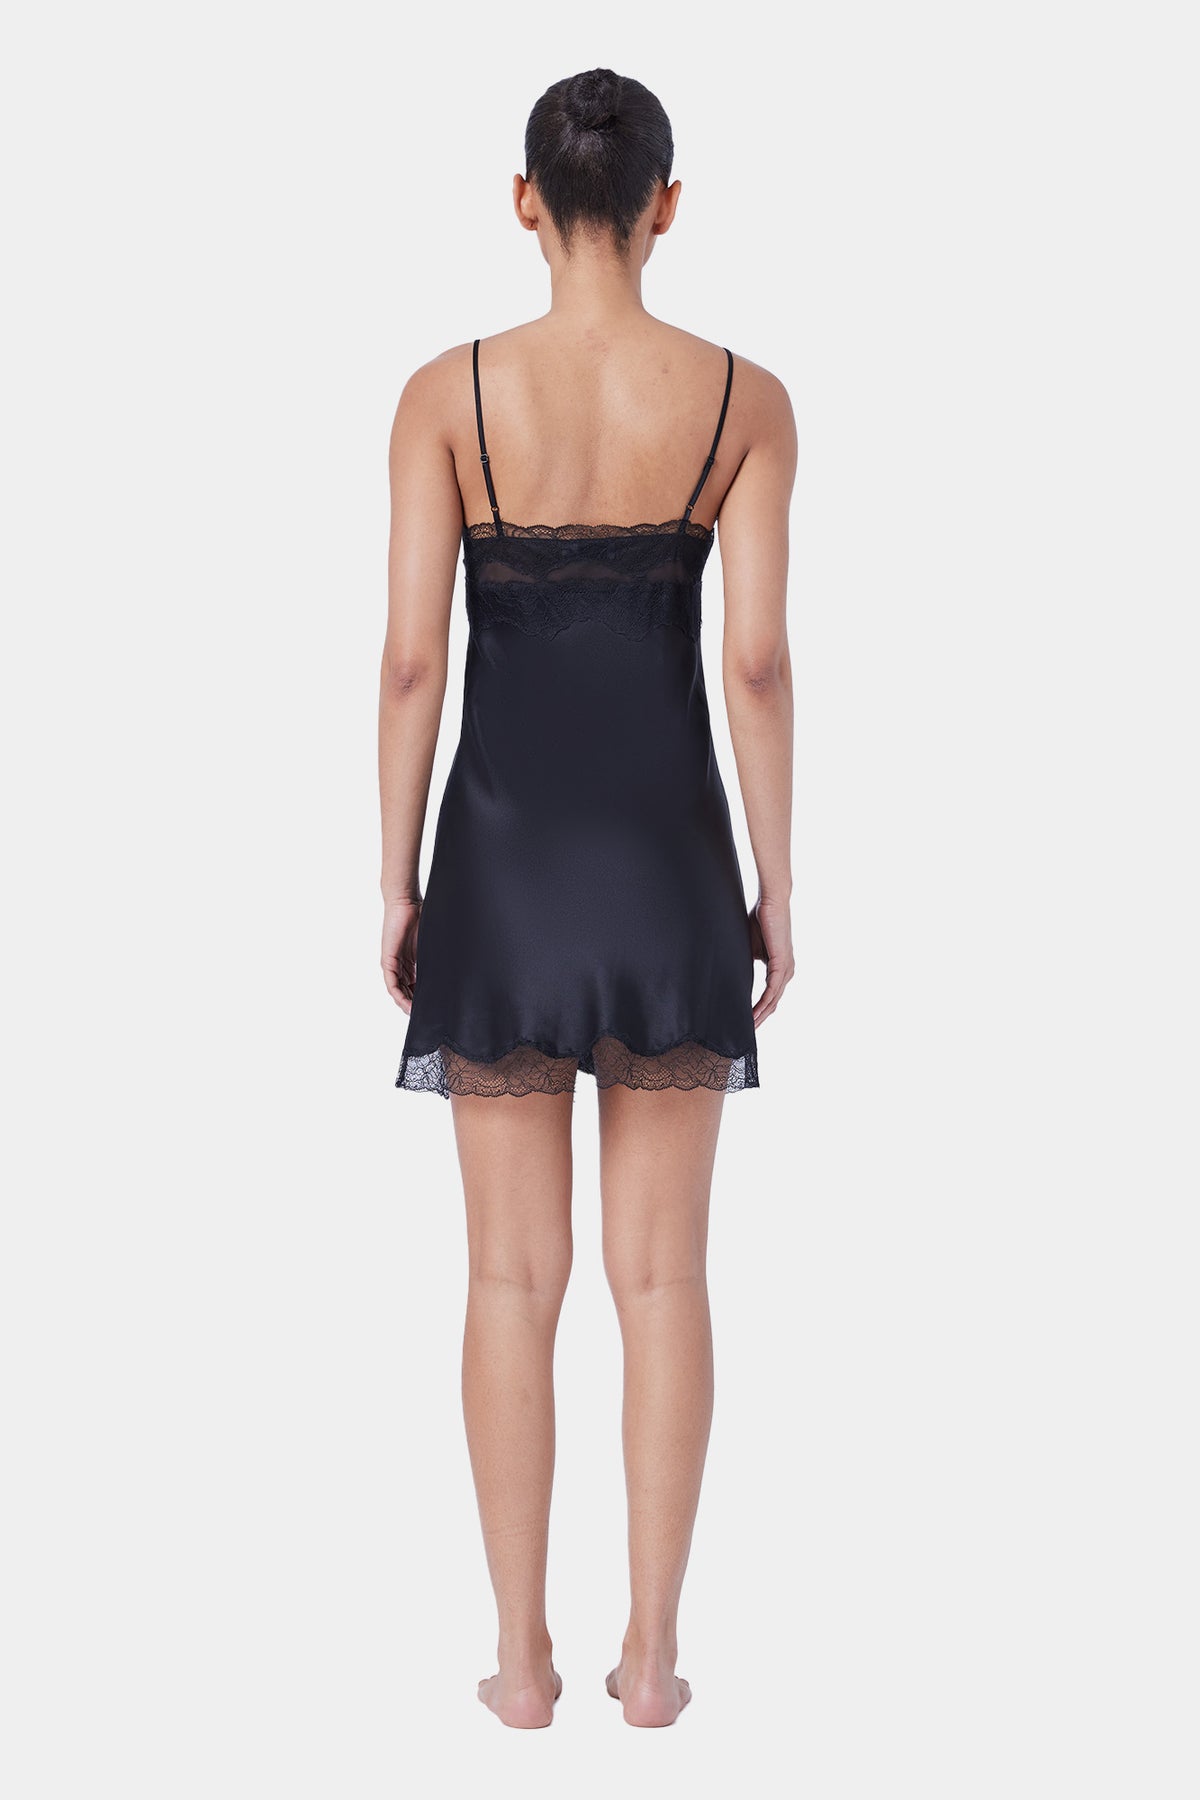 The Skylar Lace Chemise By GINIA In Black